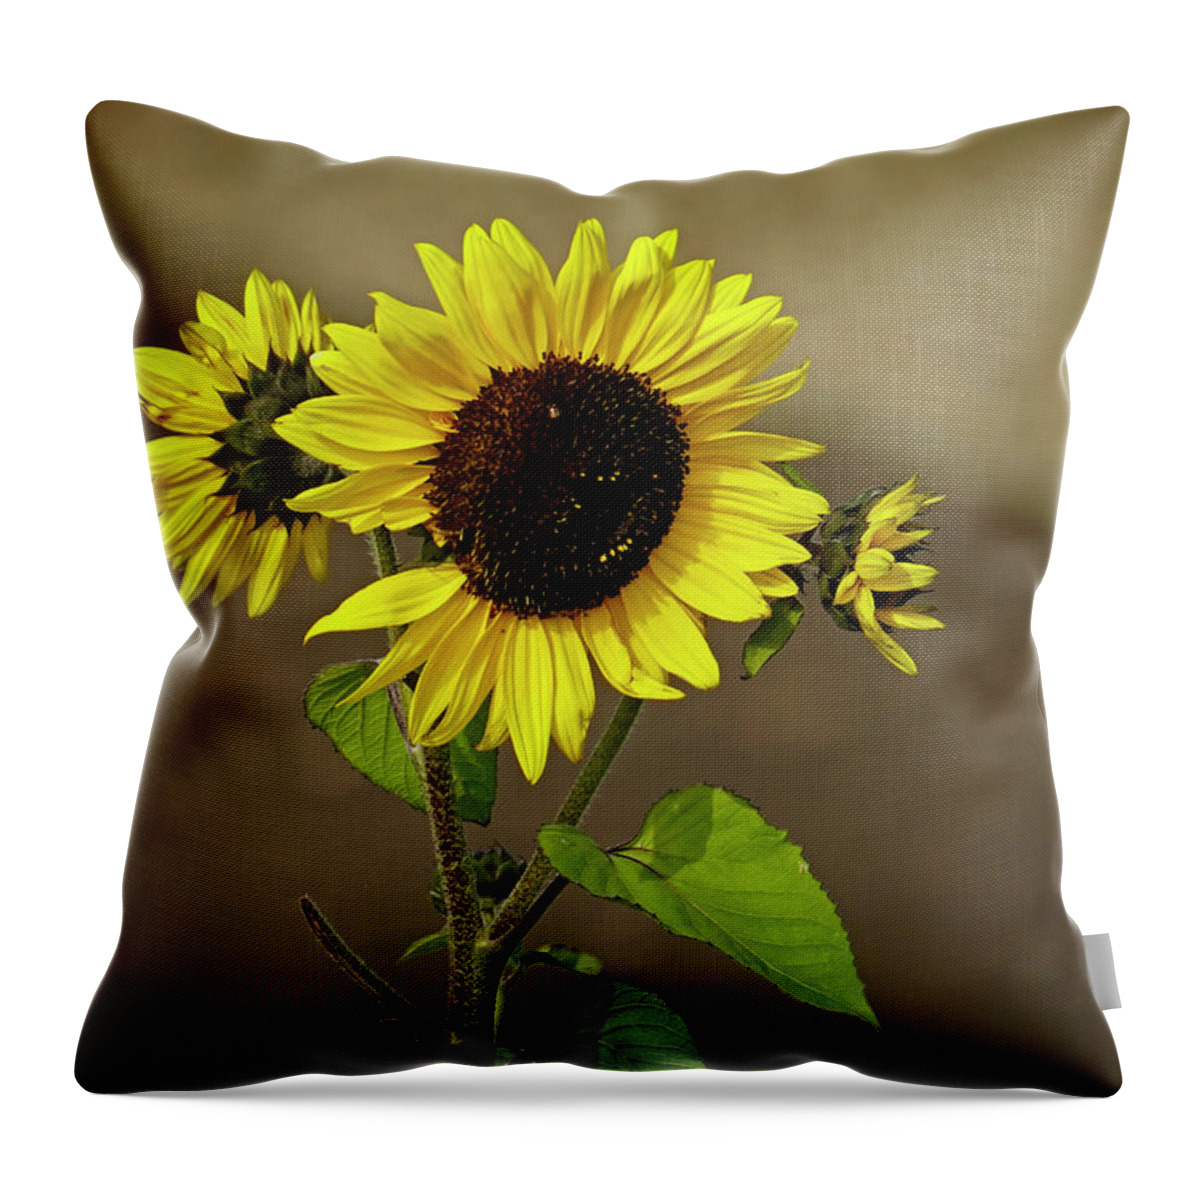 Sunflower Throw Pillow featuring the photograph Sunflower 1 by Inge Riis McDonald